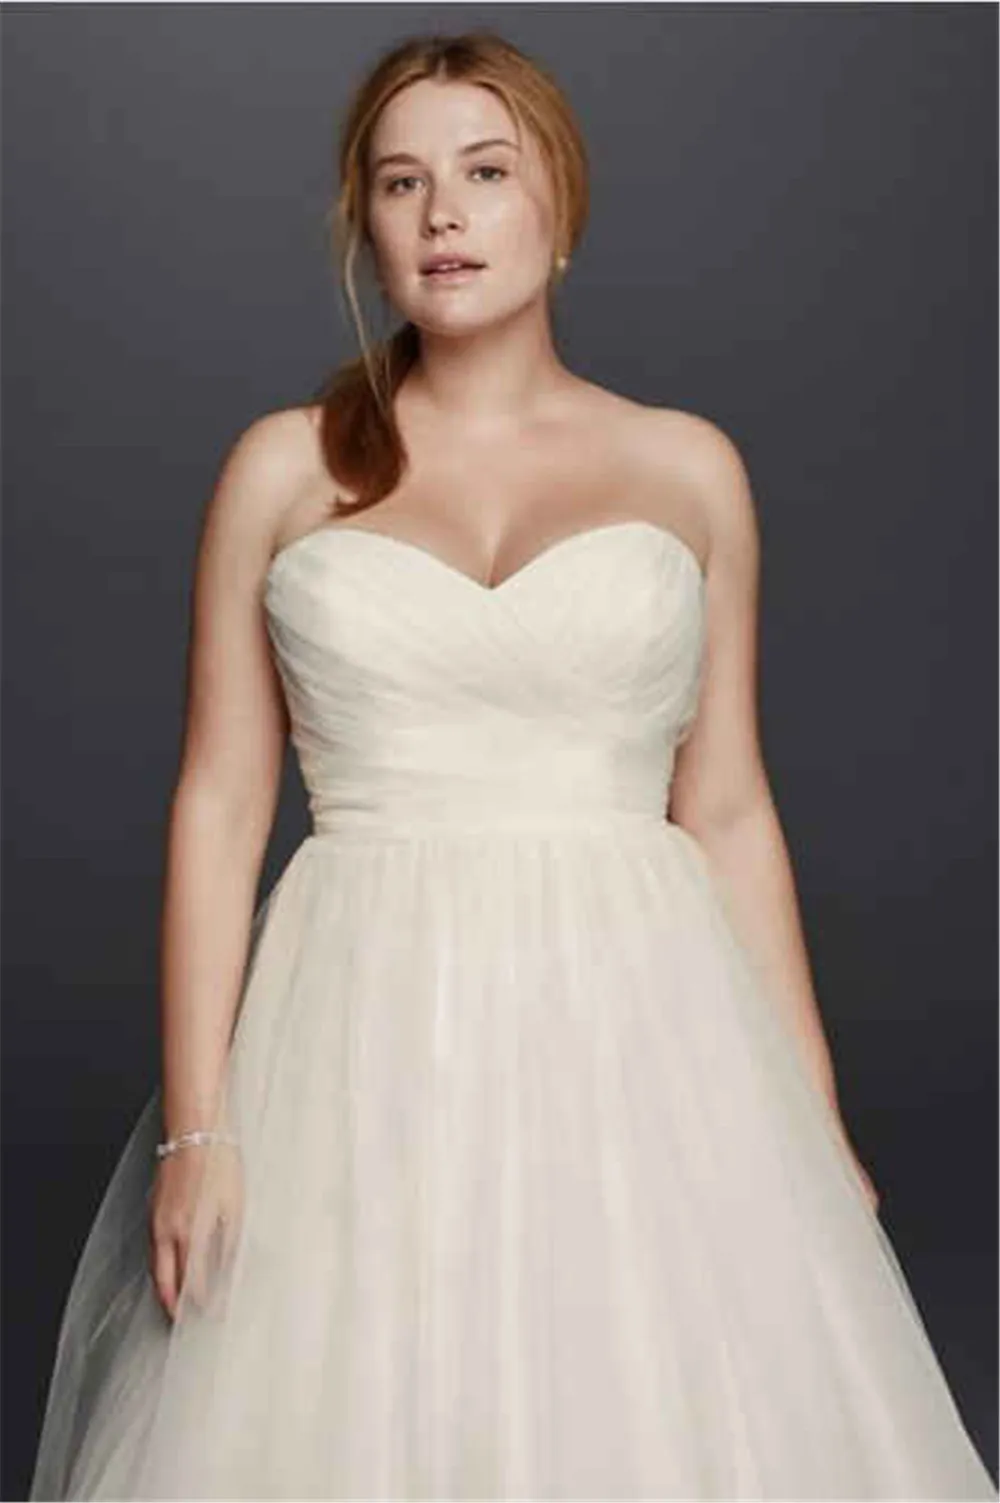 Plus Size Strapless Sweetheart Tulle Wedding Dress 9WG3802 Removable Crystals Sash Beautifully Pleated Bodice Bridal Gown vestido de novia